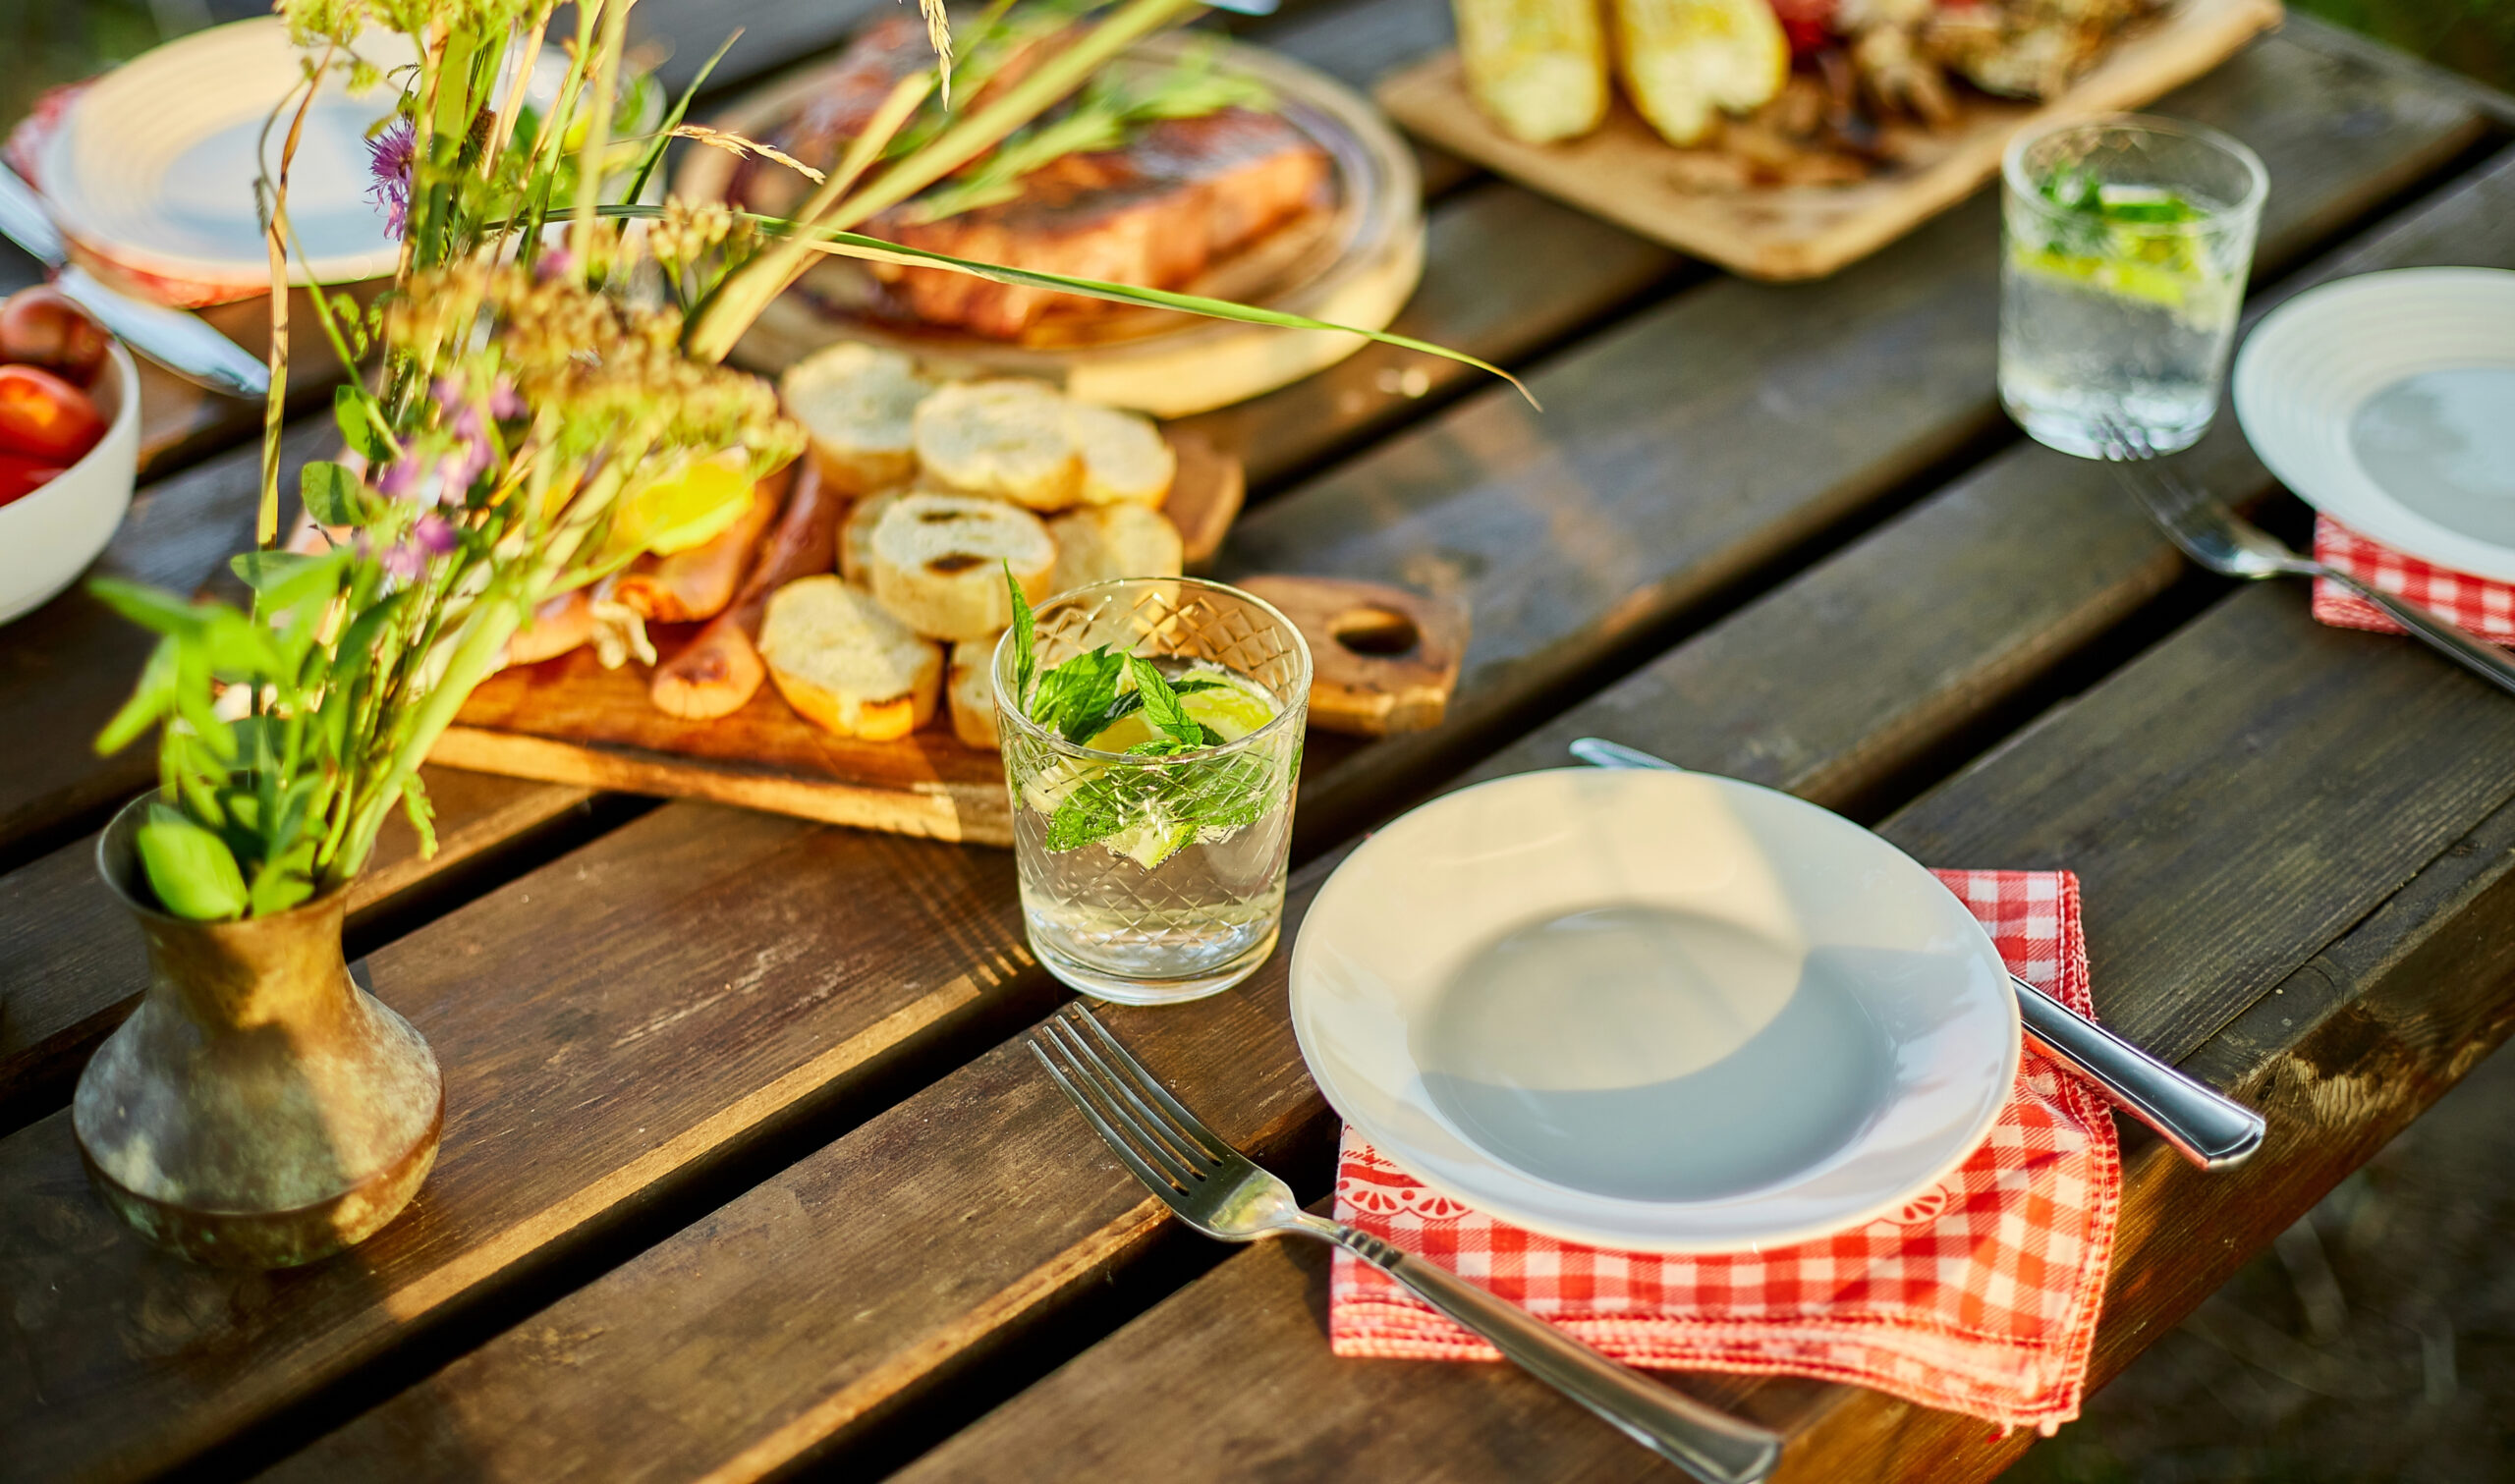 Outdoor dining picnic table and food